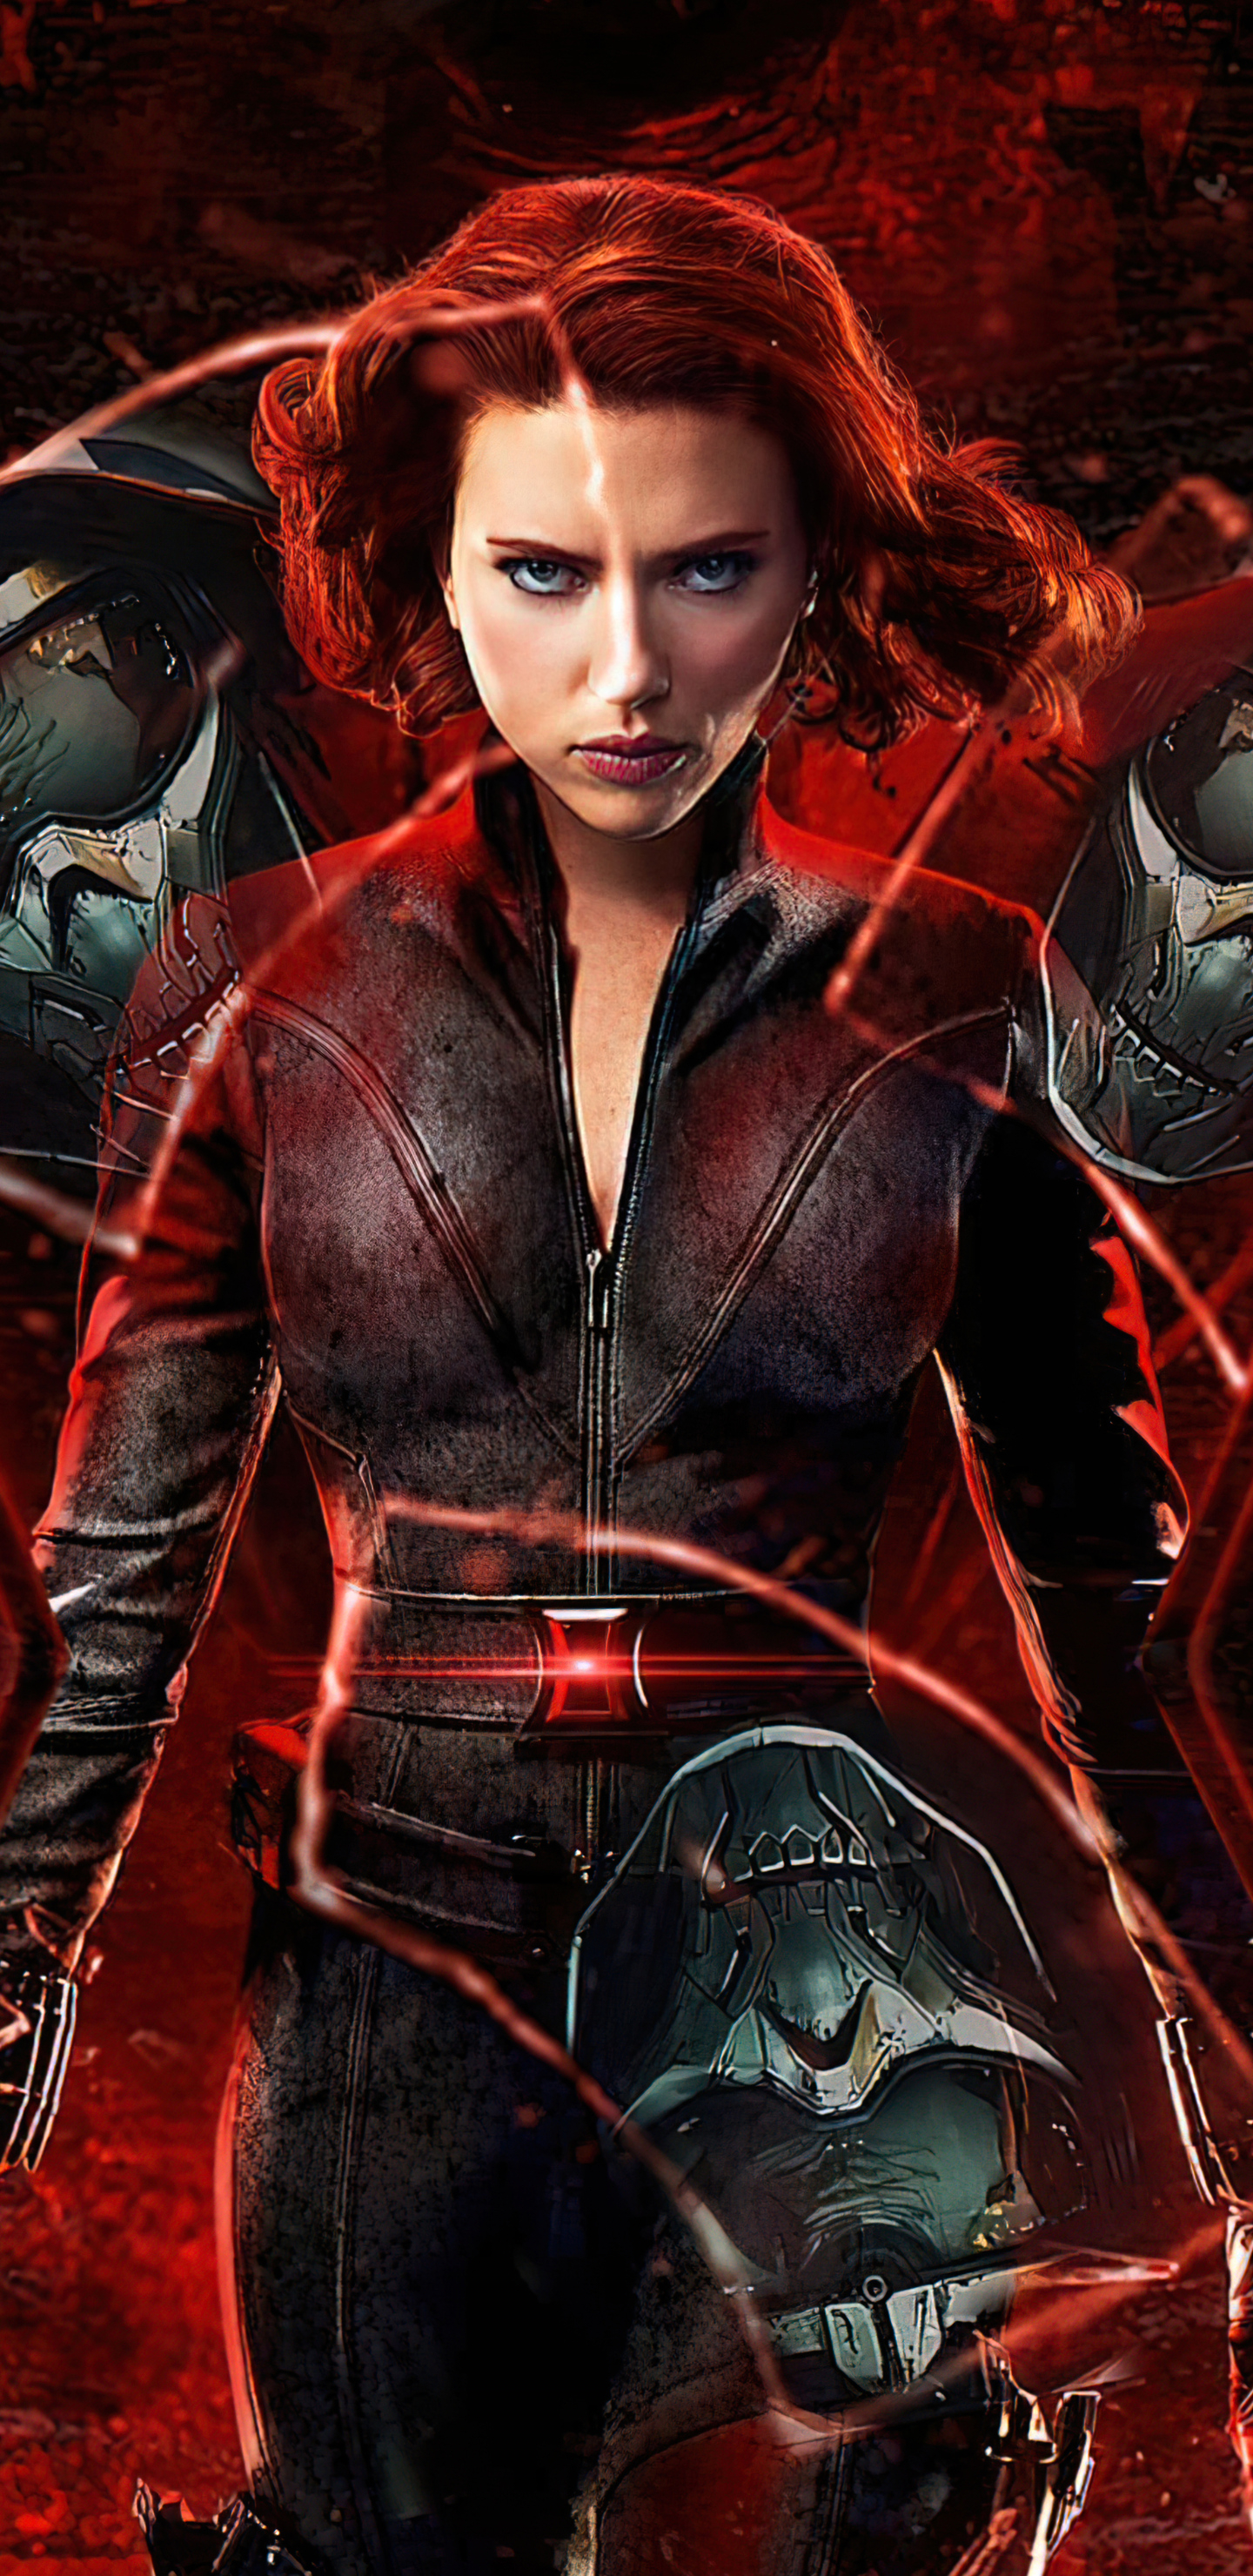 1440x2960 Scarlett Johansson Black Widow Poster 4k Samsung Galaxy Note 9,8, S9,S8,S8+ QHD HD 4k Wallpapers, Images, Backgrounds, Photos and Pictures